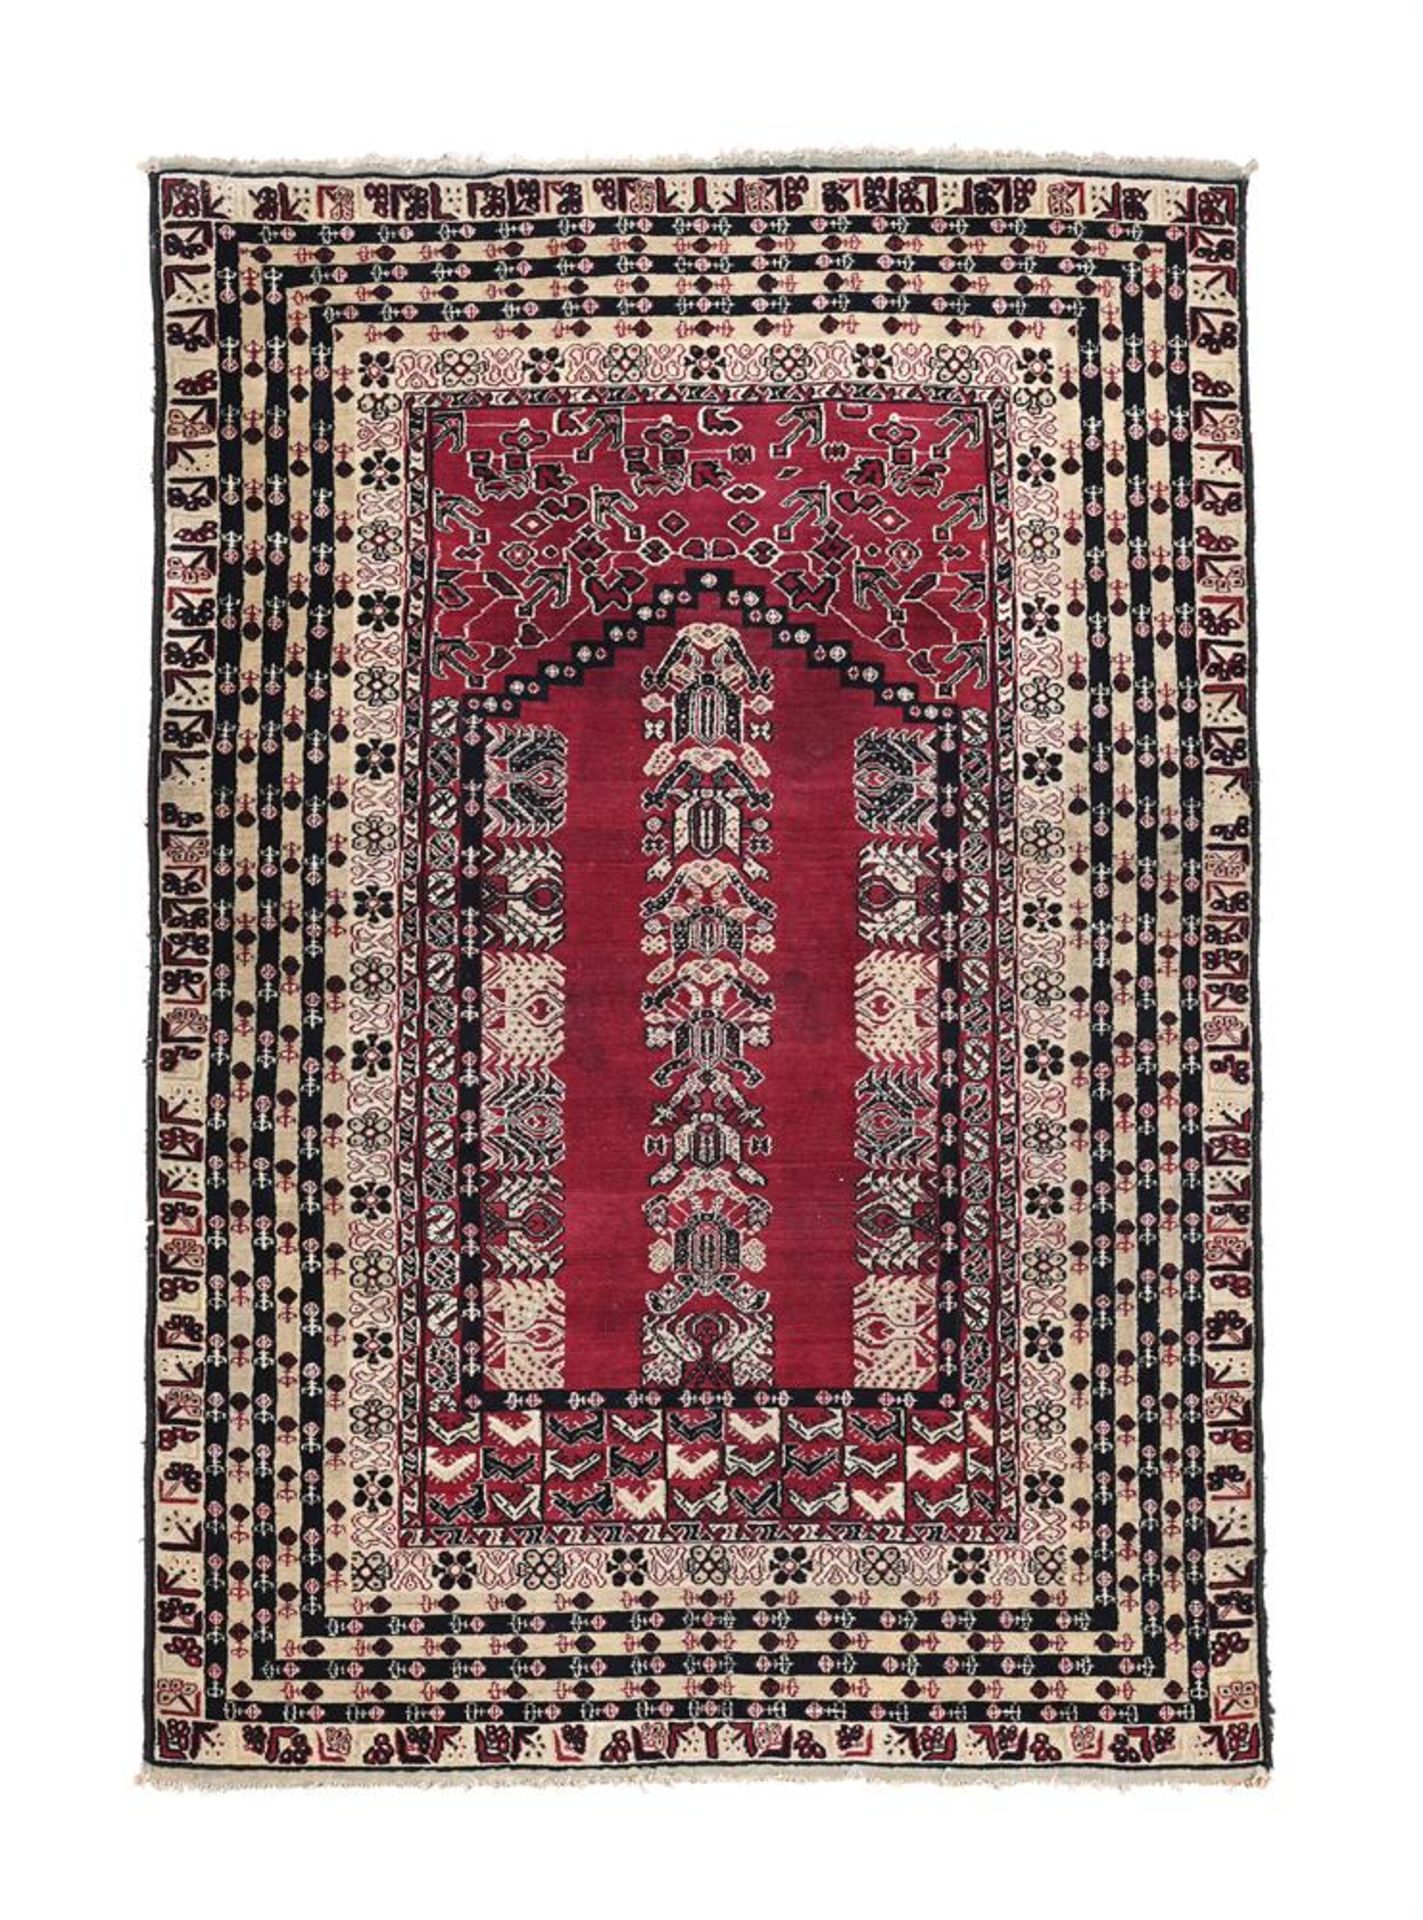 AN AGRA RUG, approximately 208 x 134cm